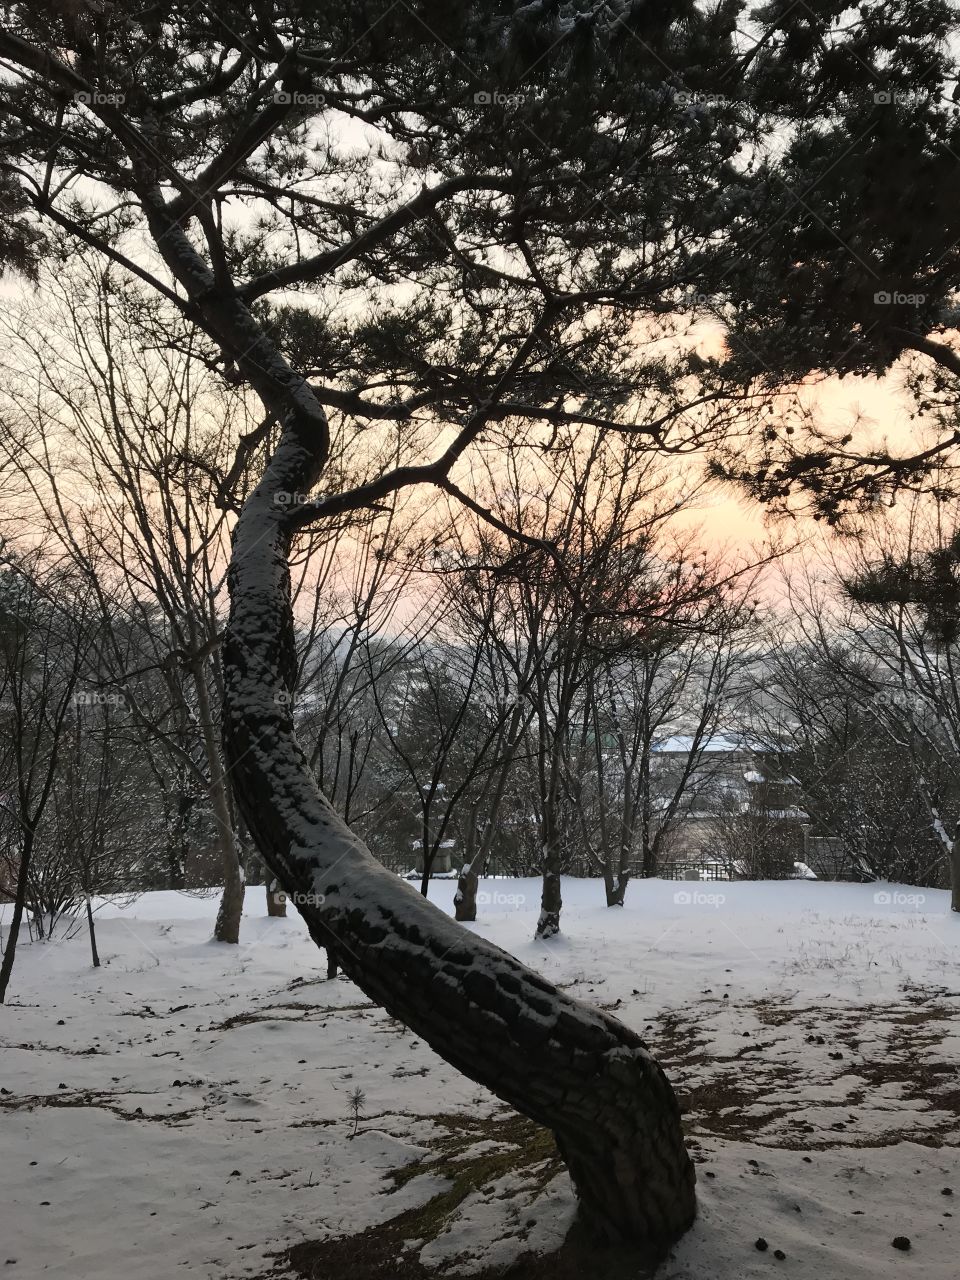 sunset picture in a mountain South Korea beautiful place 